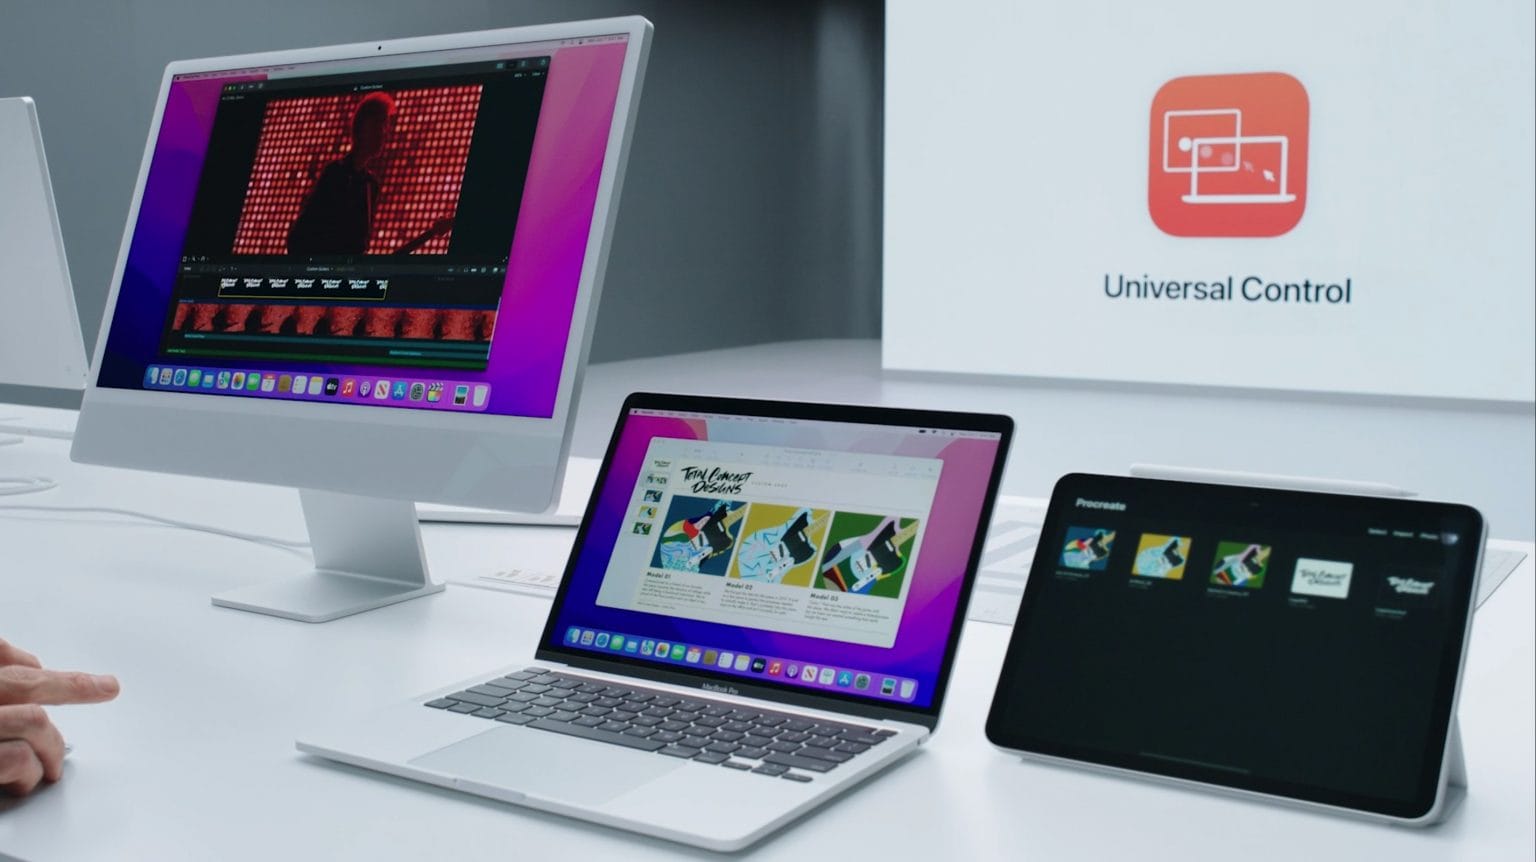 Universal Control is part of macOS Monterey and iPadOS 15.